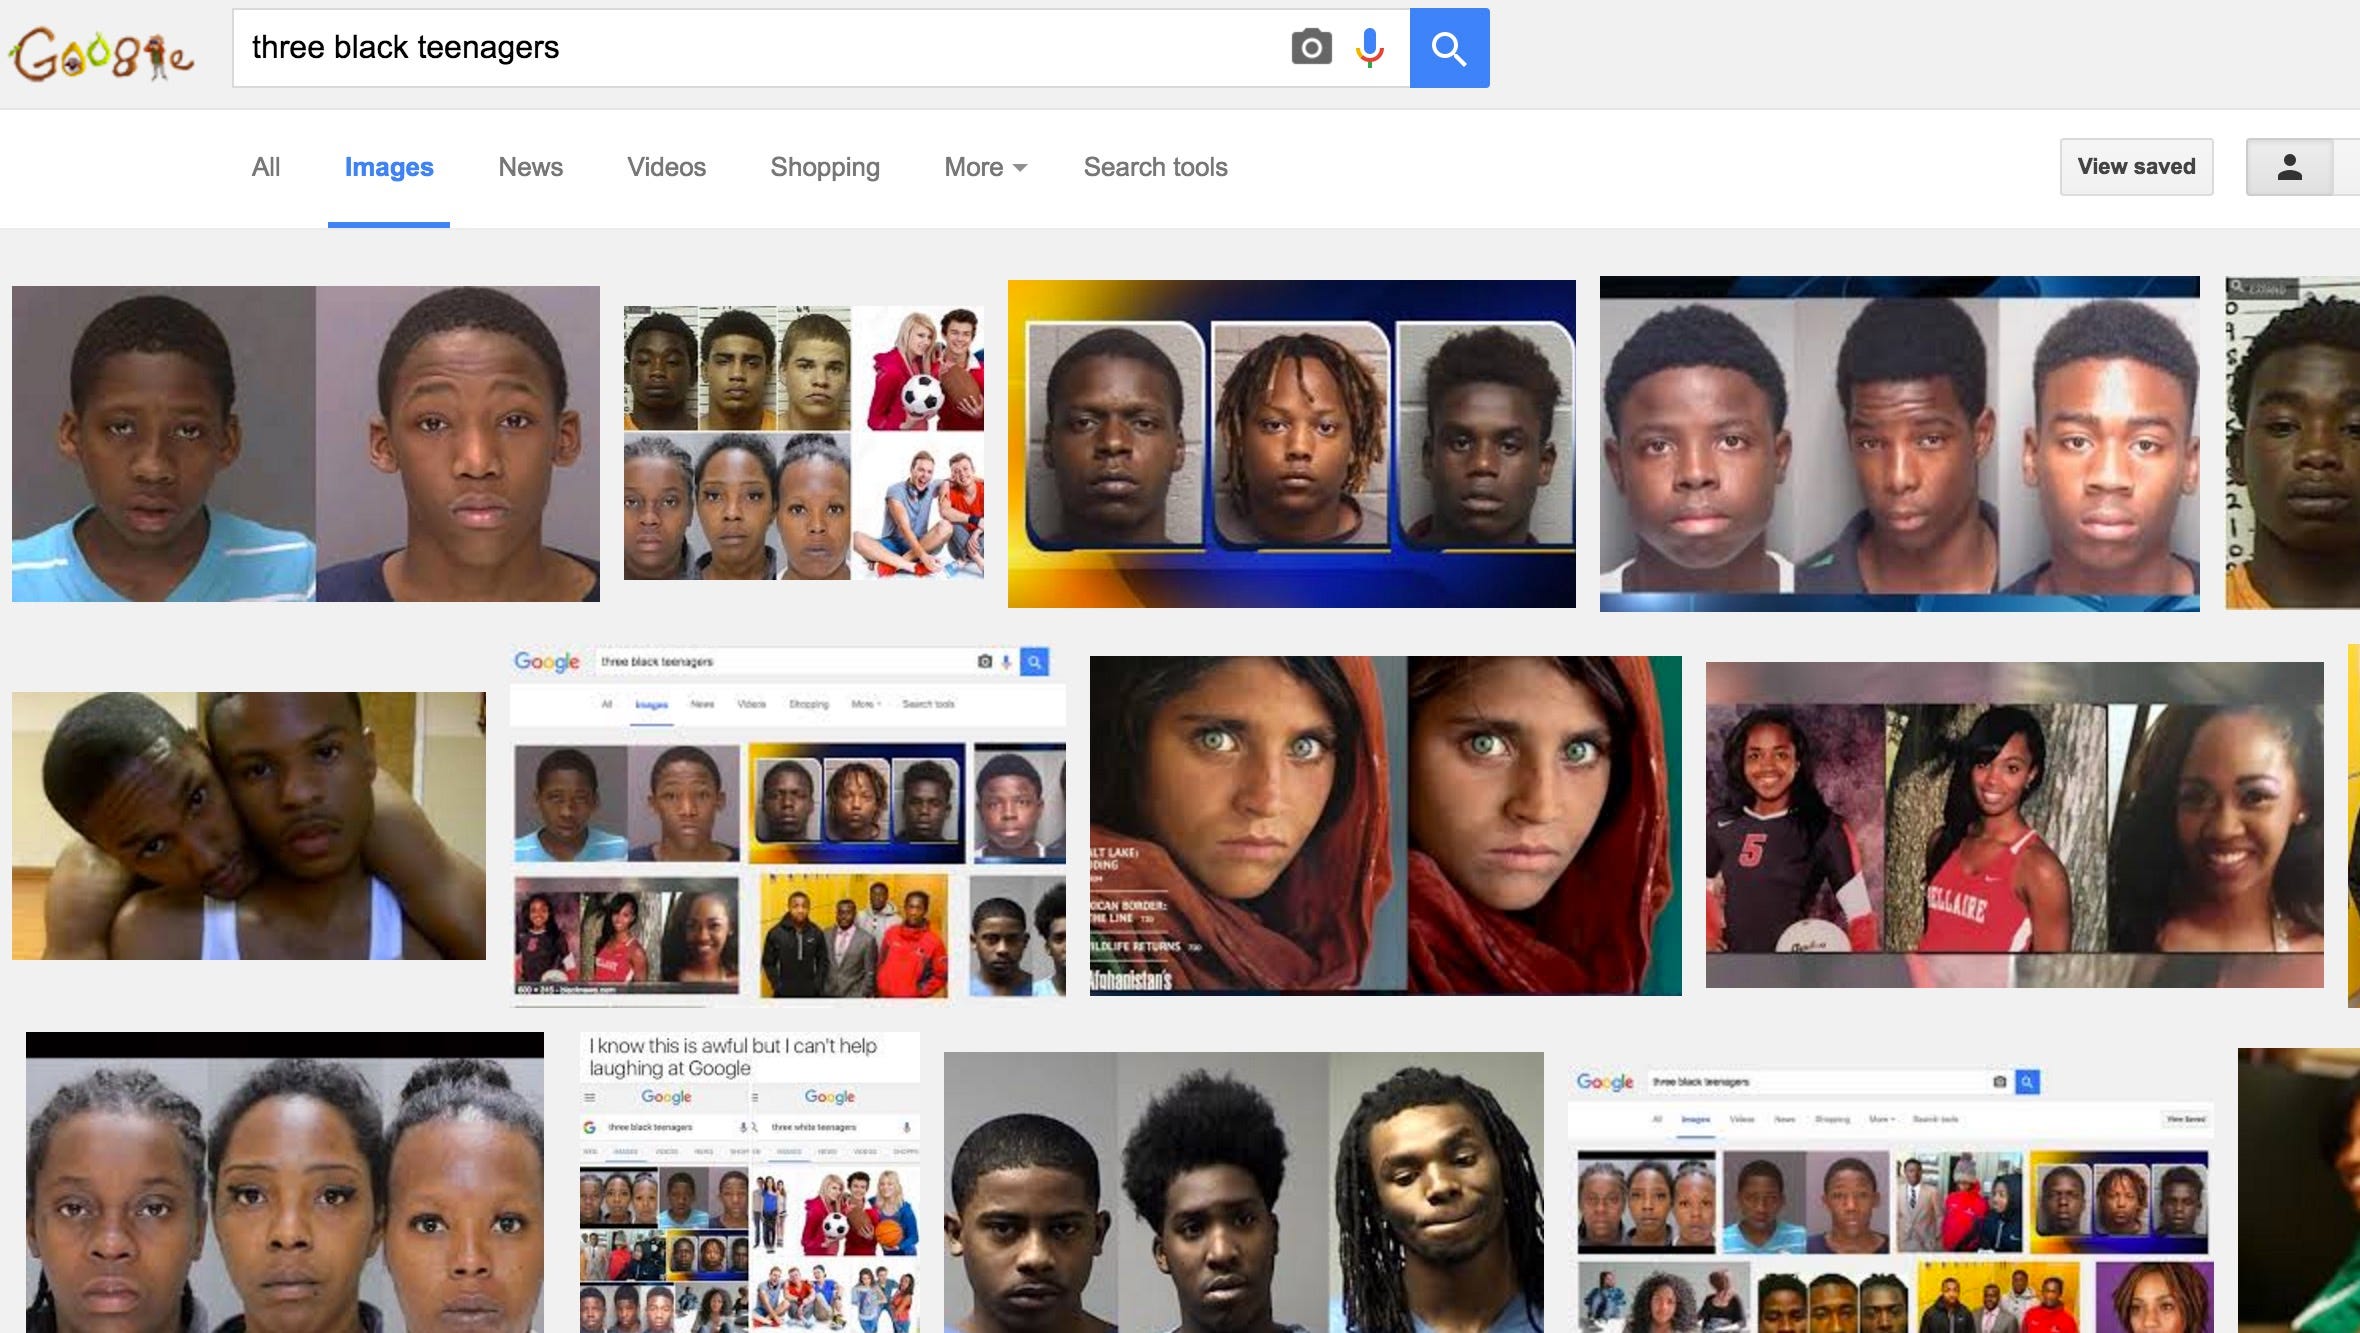 Teenxvideo Com - Three black teenagers' Google search sparks outrage